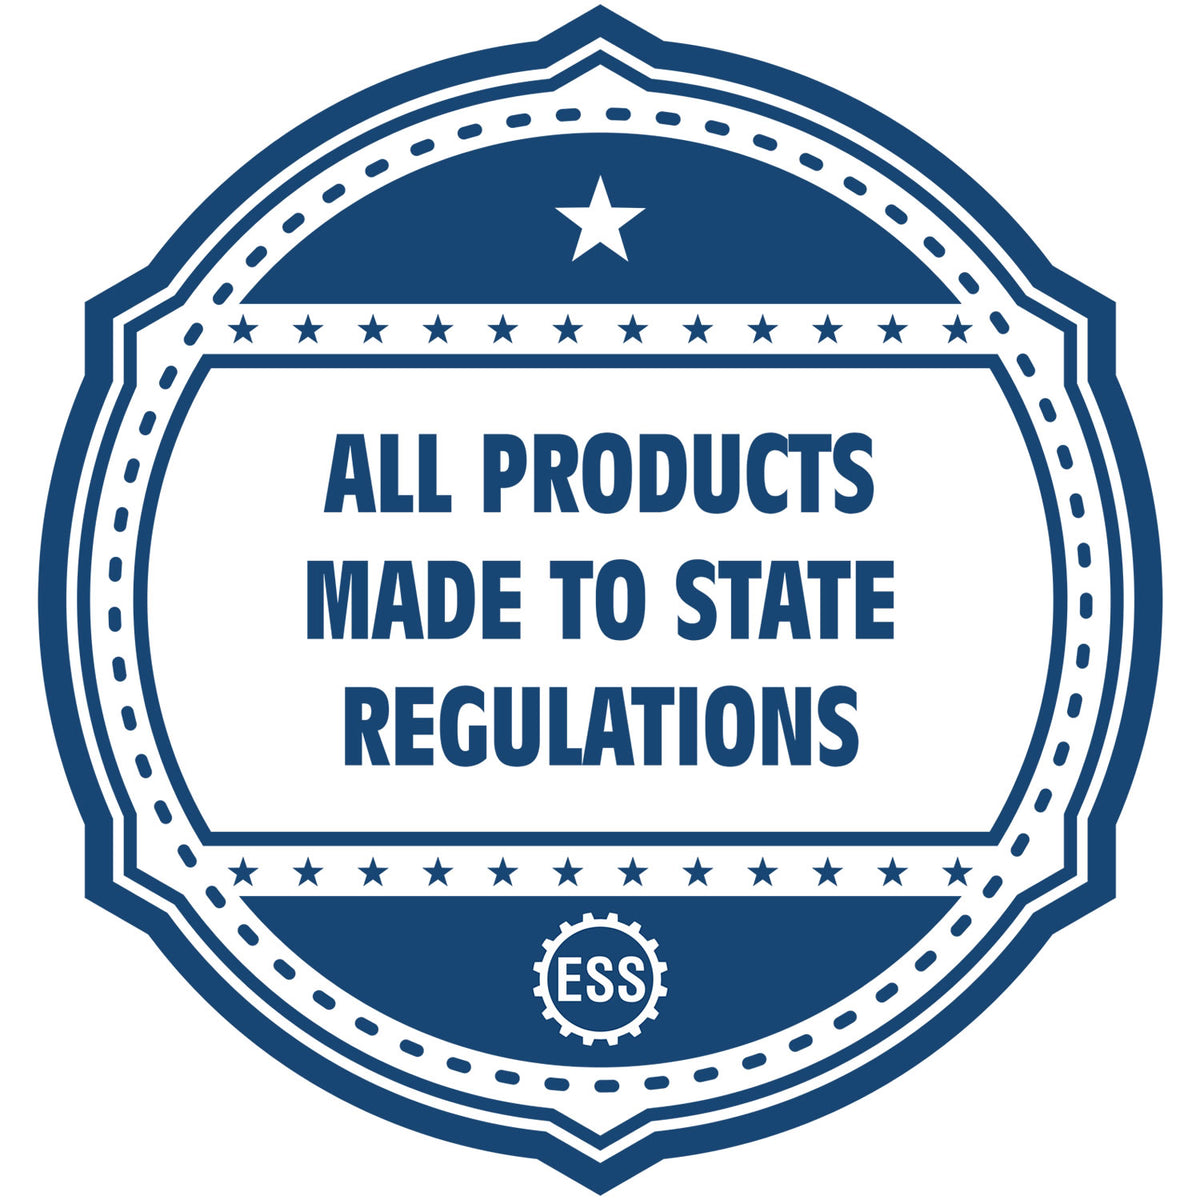 An icon or badge element for the Heavy Duty Cast Iron Georgia Architect Embosser showing that this product is made in compliance with state regulations.